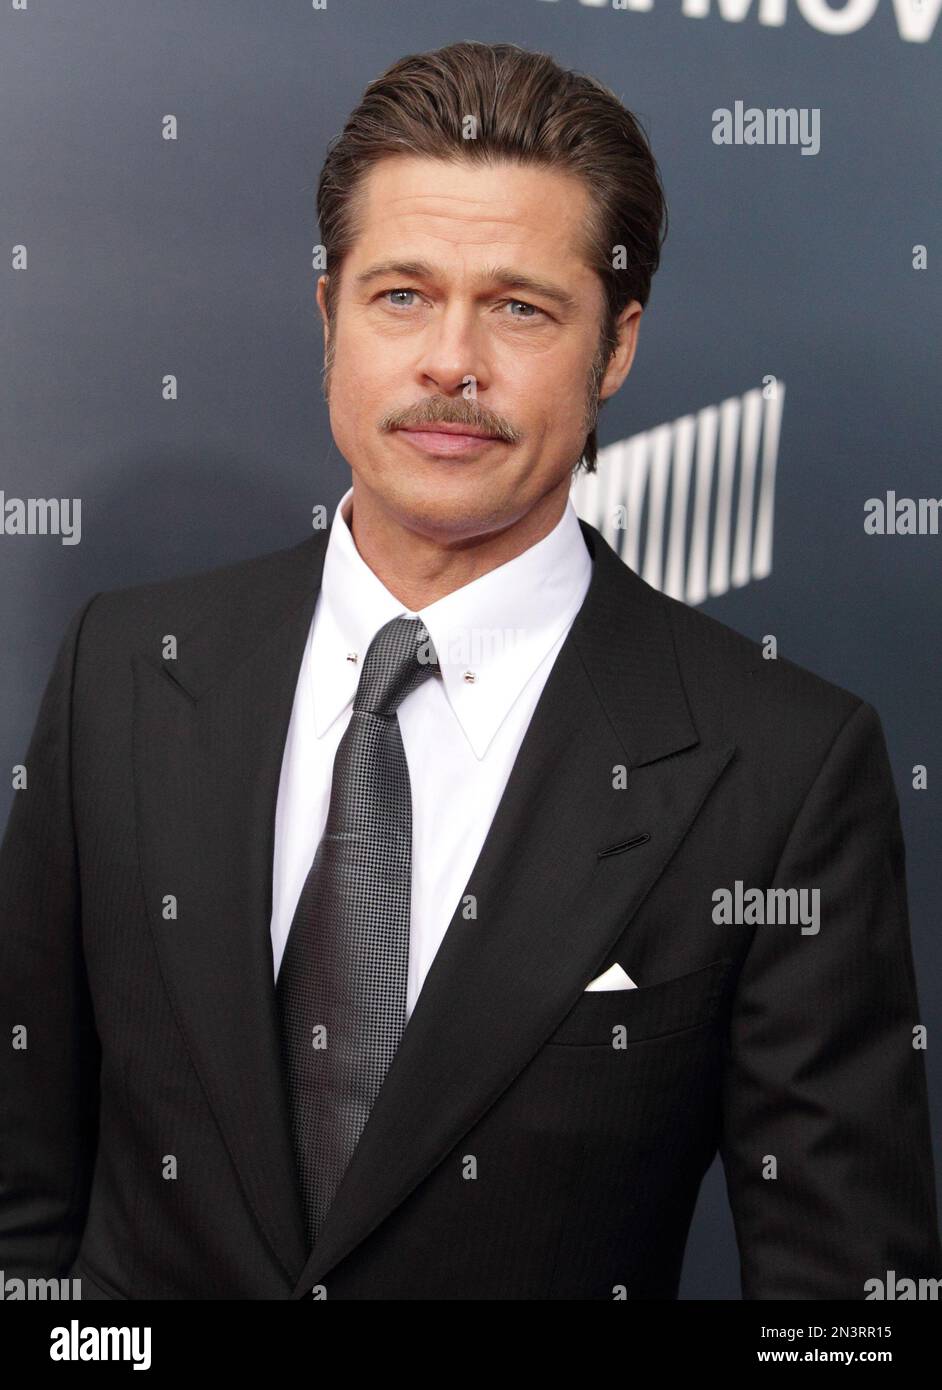 Actor Brad Pitt arrives for the world premiere of “Fury” at the Newseum ...